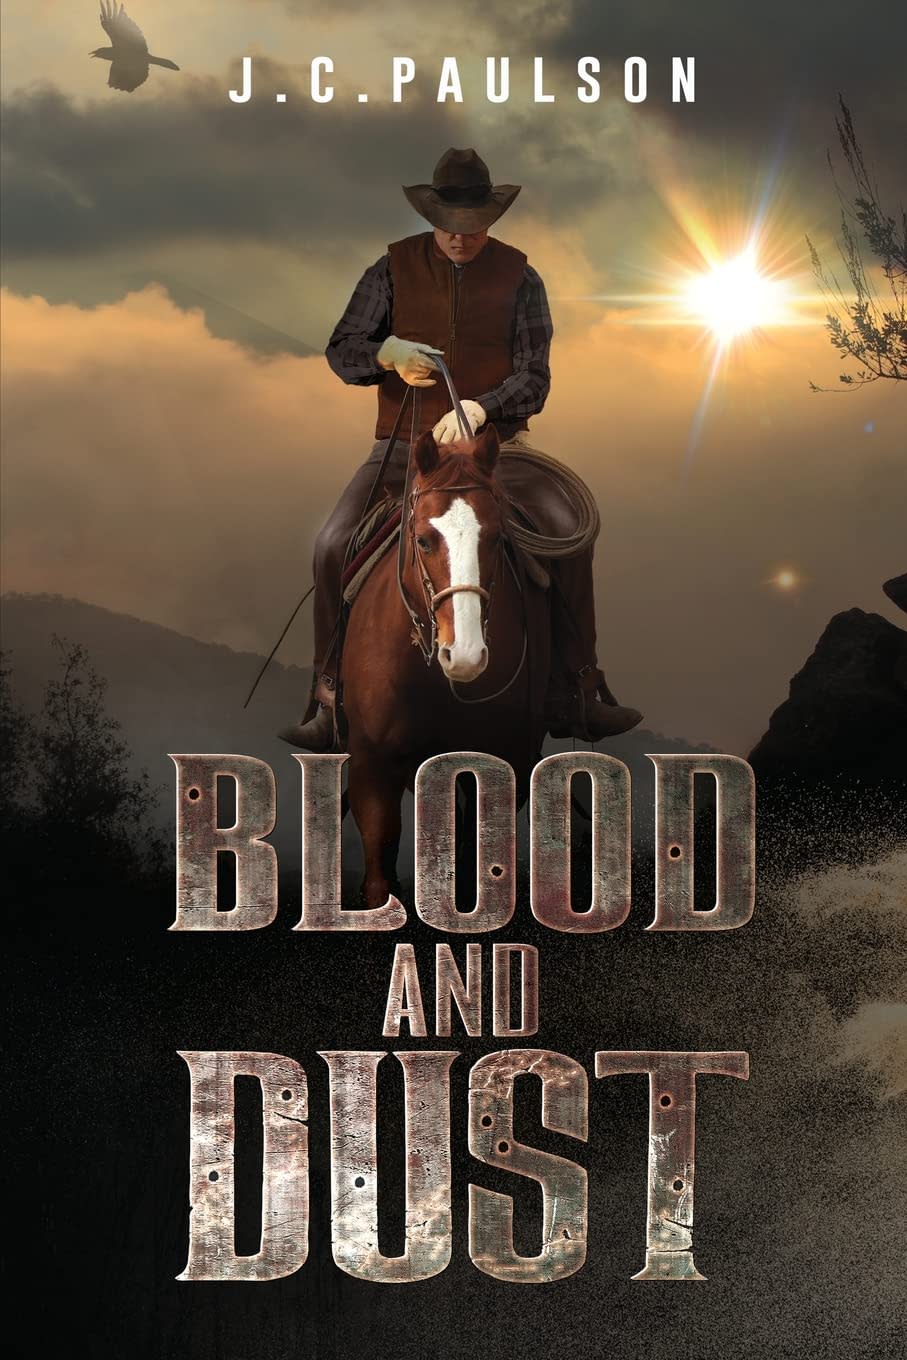 "Blood and Dust" by J.C. Paulson